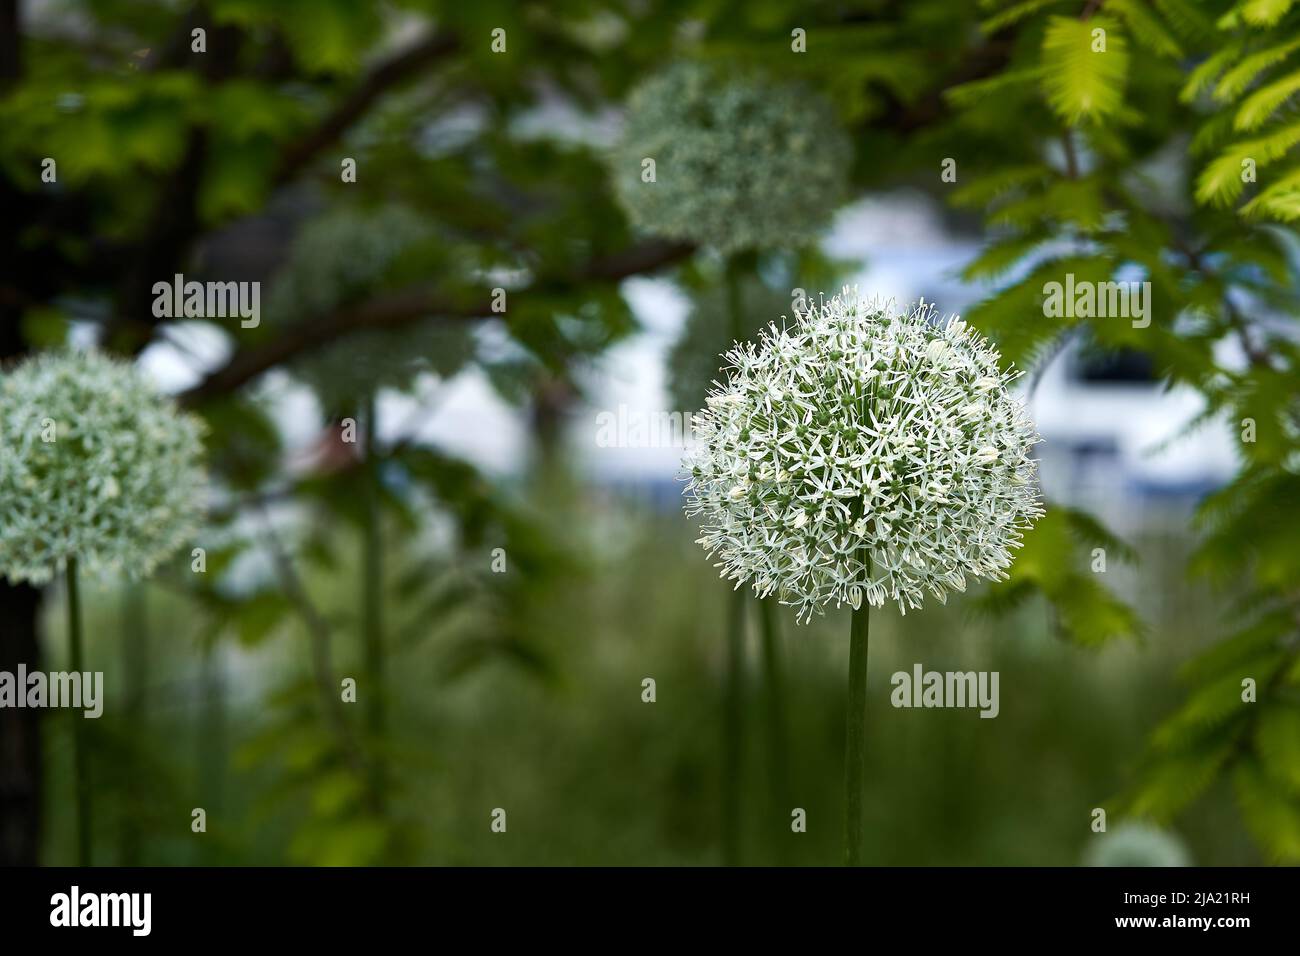 large white allium in foreground with trees, green leaves in blurred background Stock Photo